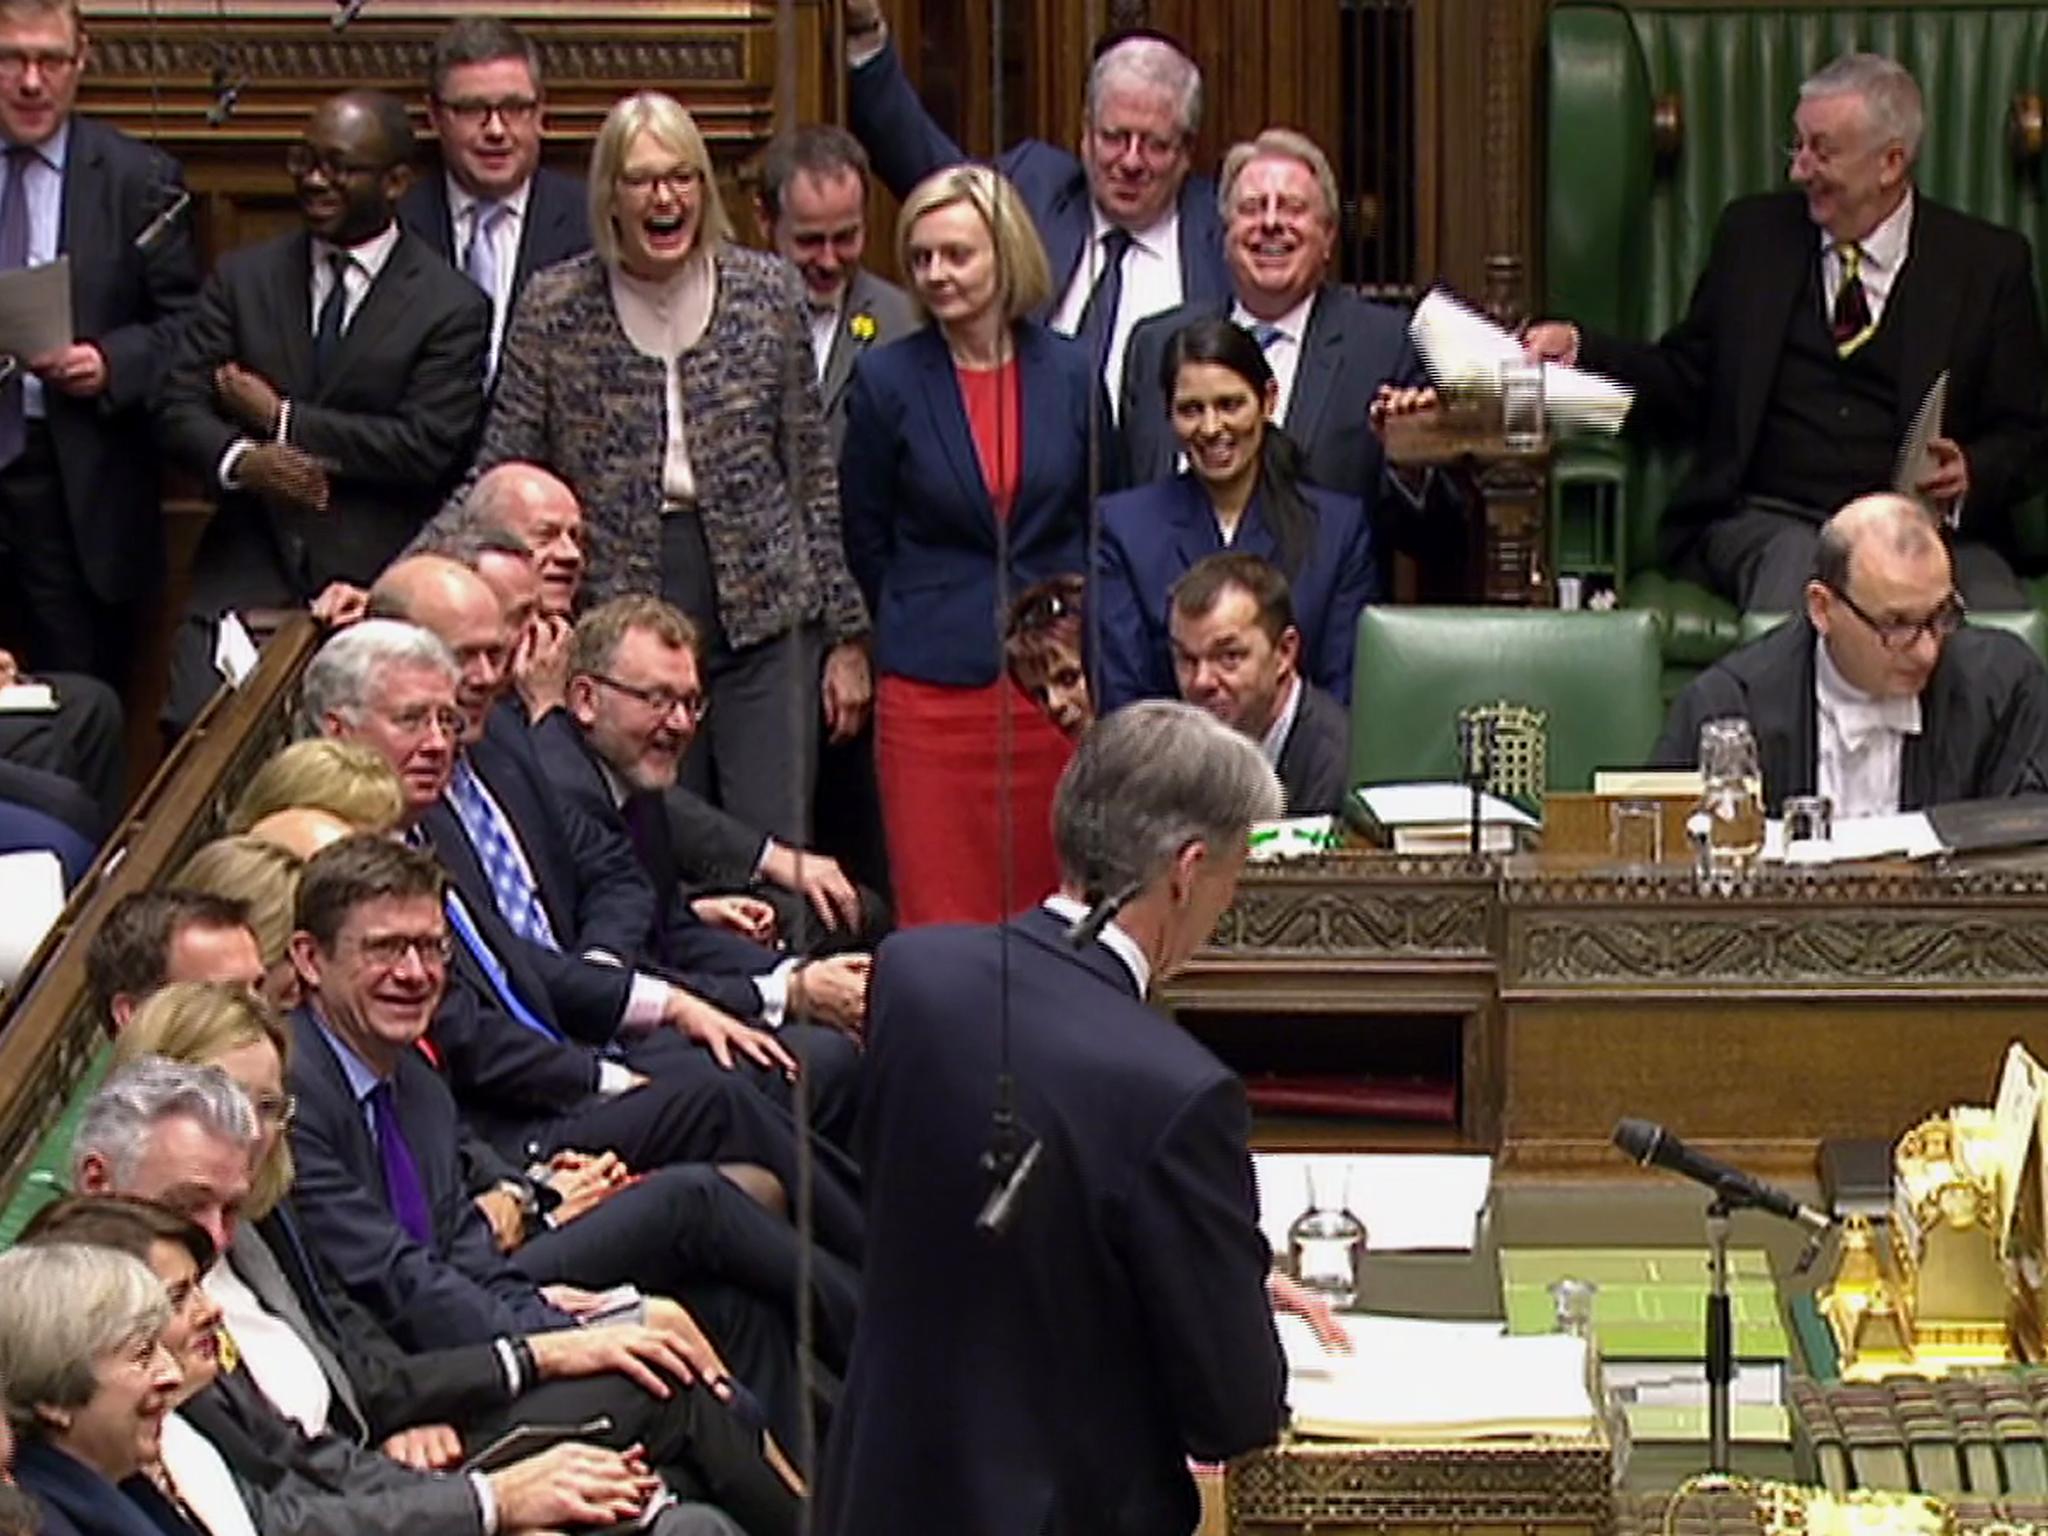 Philip Hammond delivering his budget speech with a few laughs